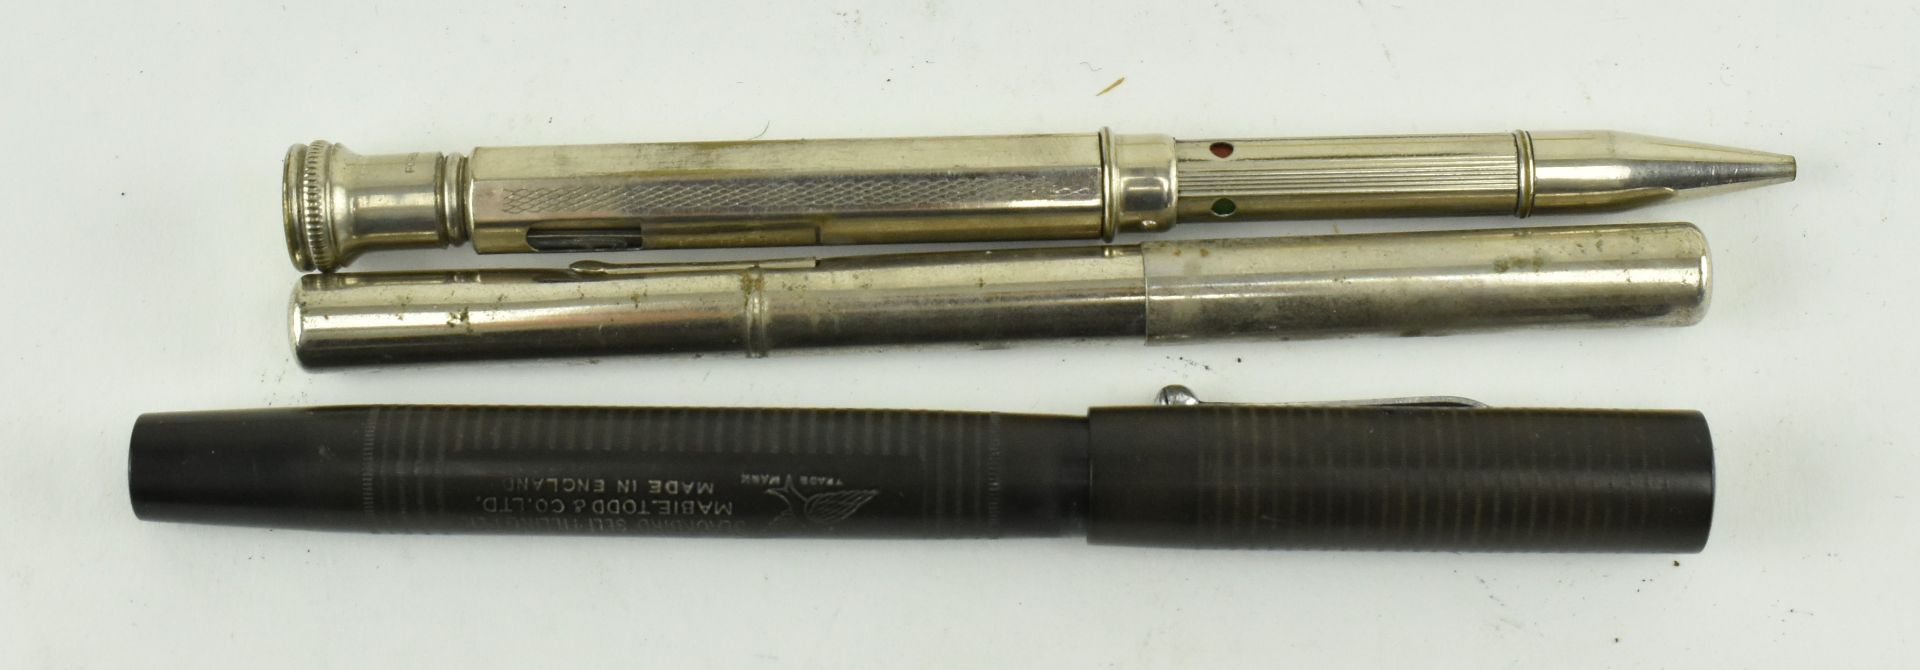 THREE EARLY - MID 20TH CENTURY CASED PENS / PENCILS - Image 3 of 4